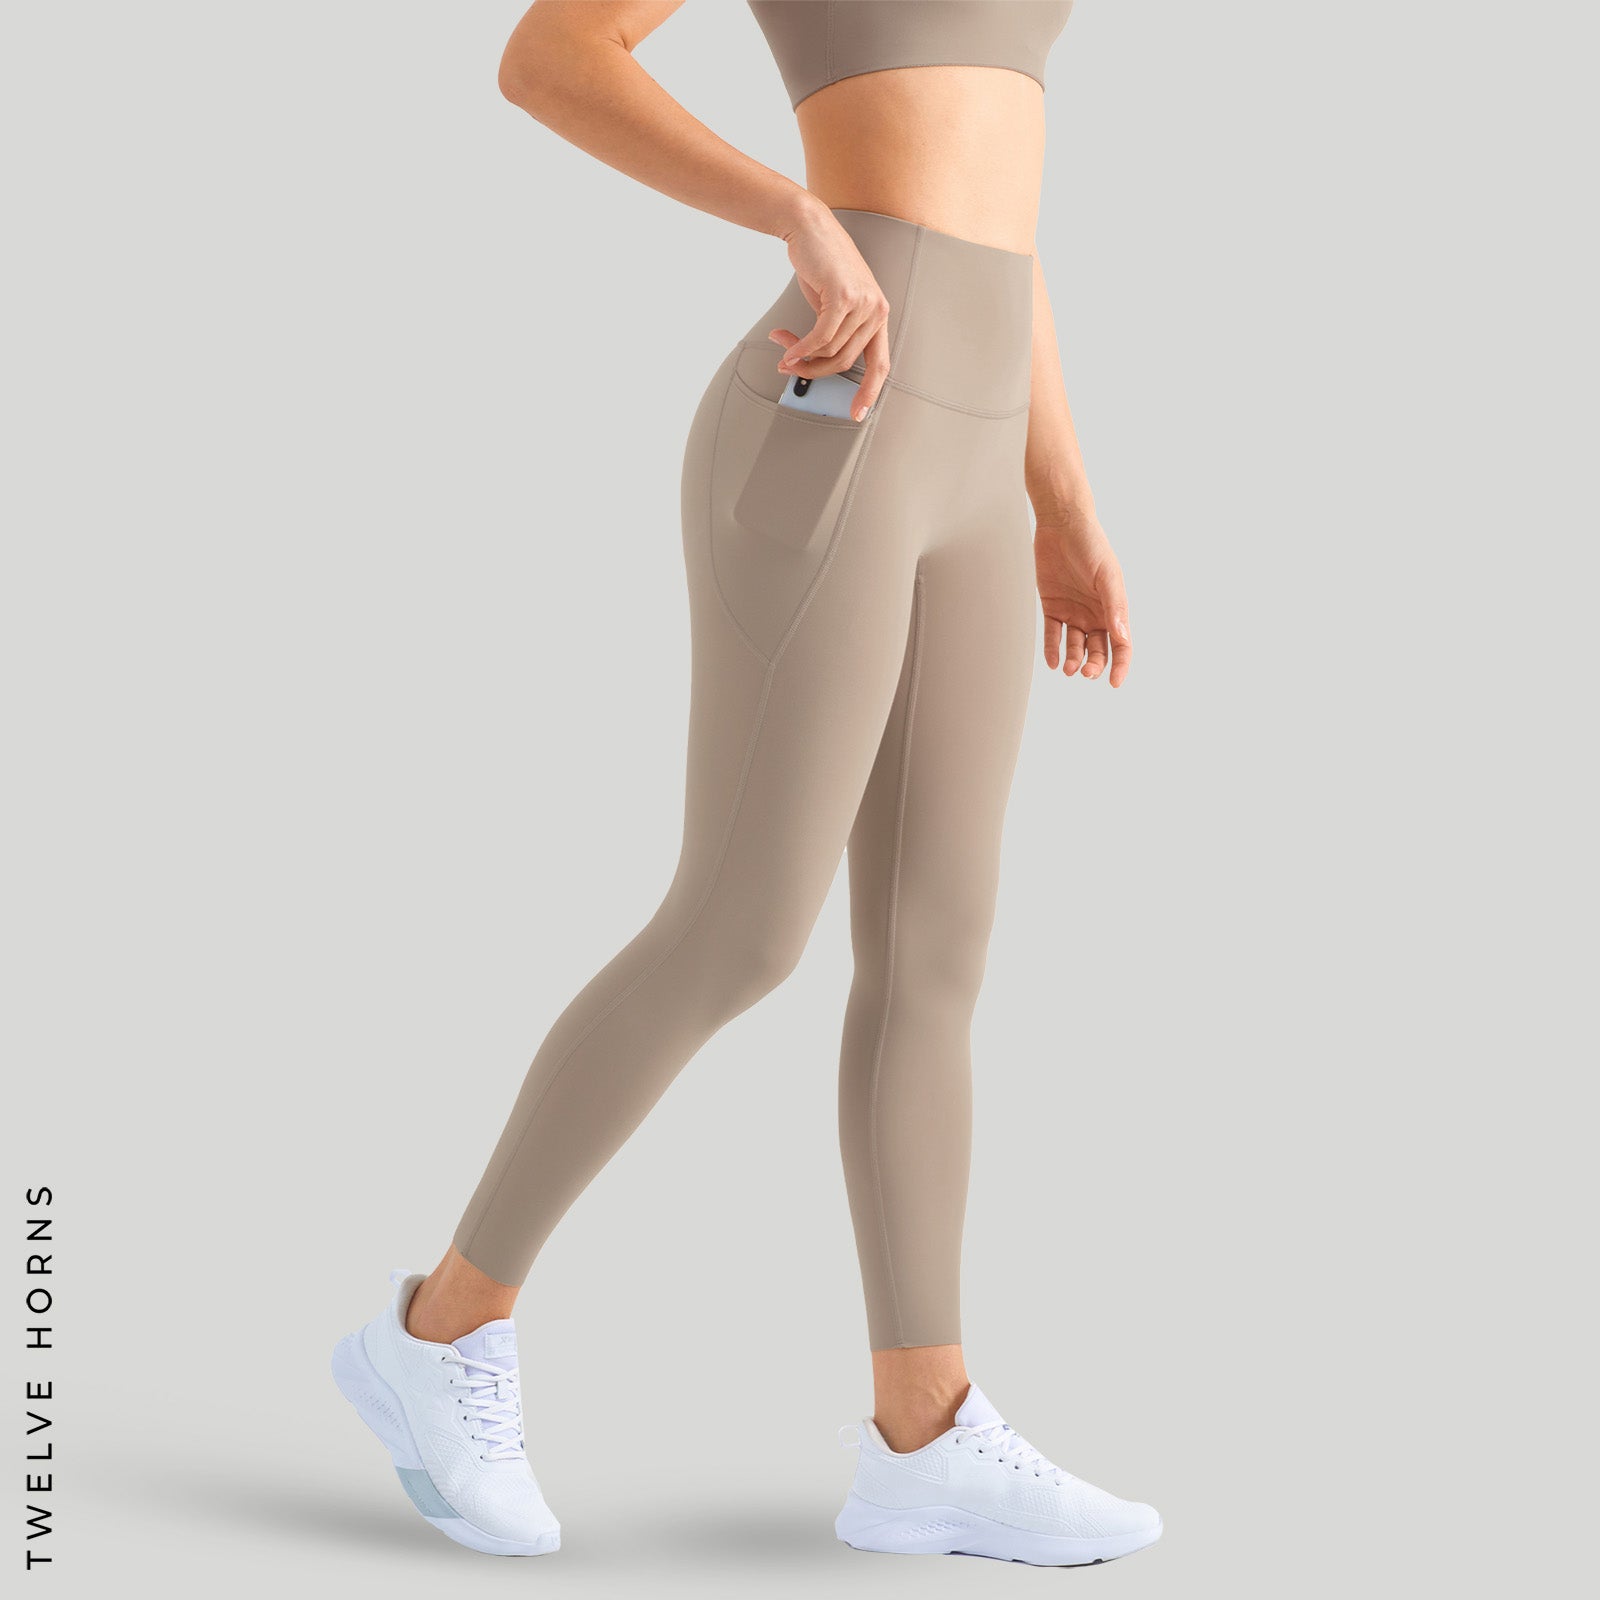 Stretchable Leggings with Pockets for Yoga, Pilates, and